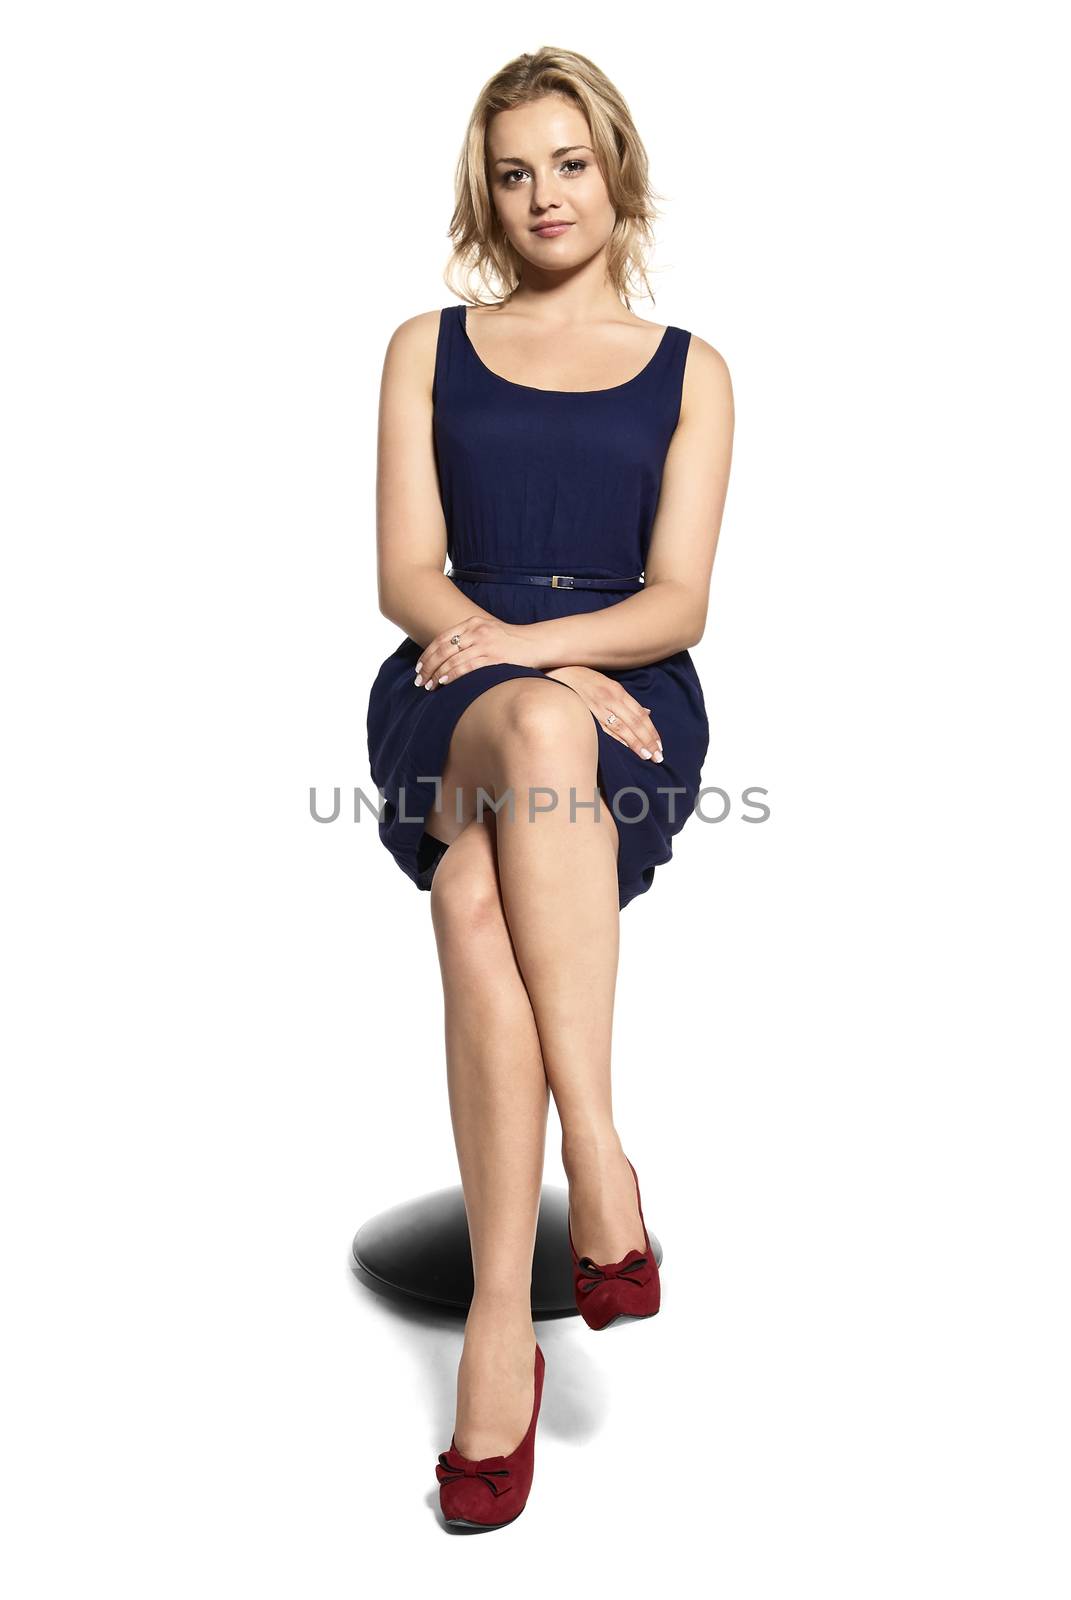 Studio shot of attractive young woman sitting on a stool and waiting for... Isolated on white background.